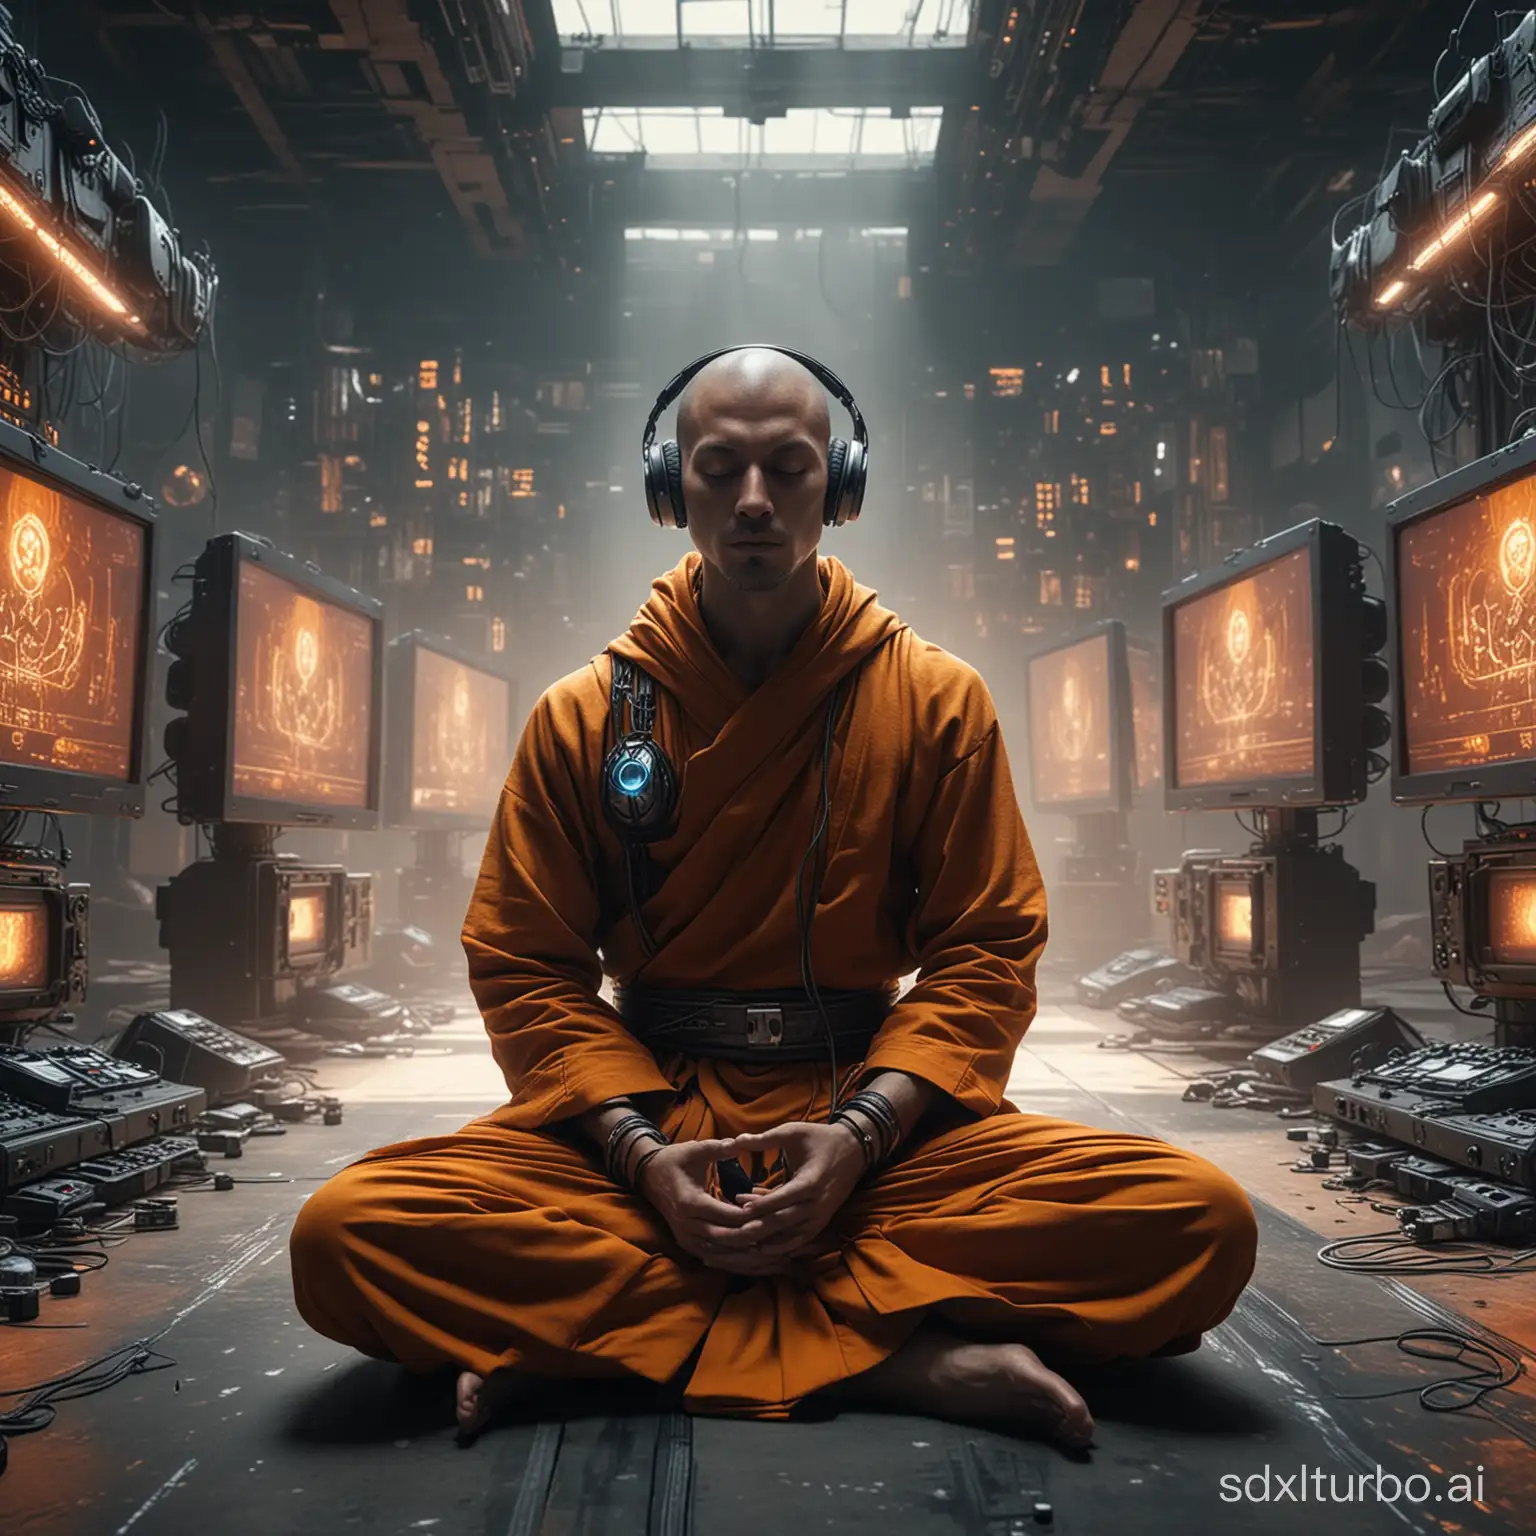 Cybernetic-Monk-Meditating-to-Music-in-a-Futuristic-Setting